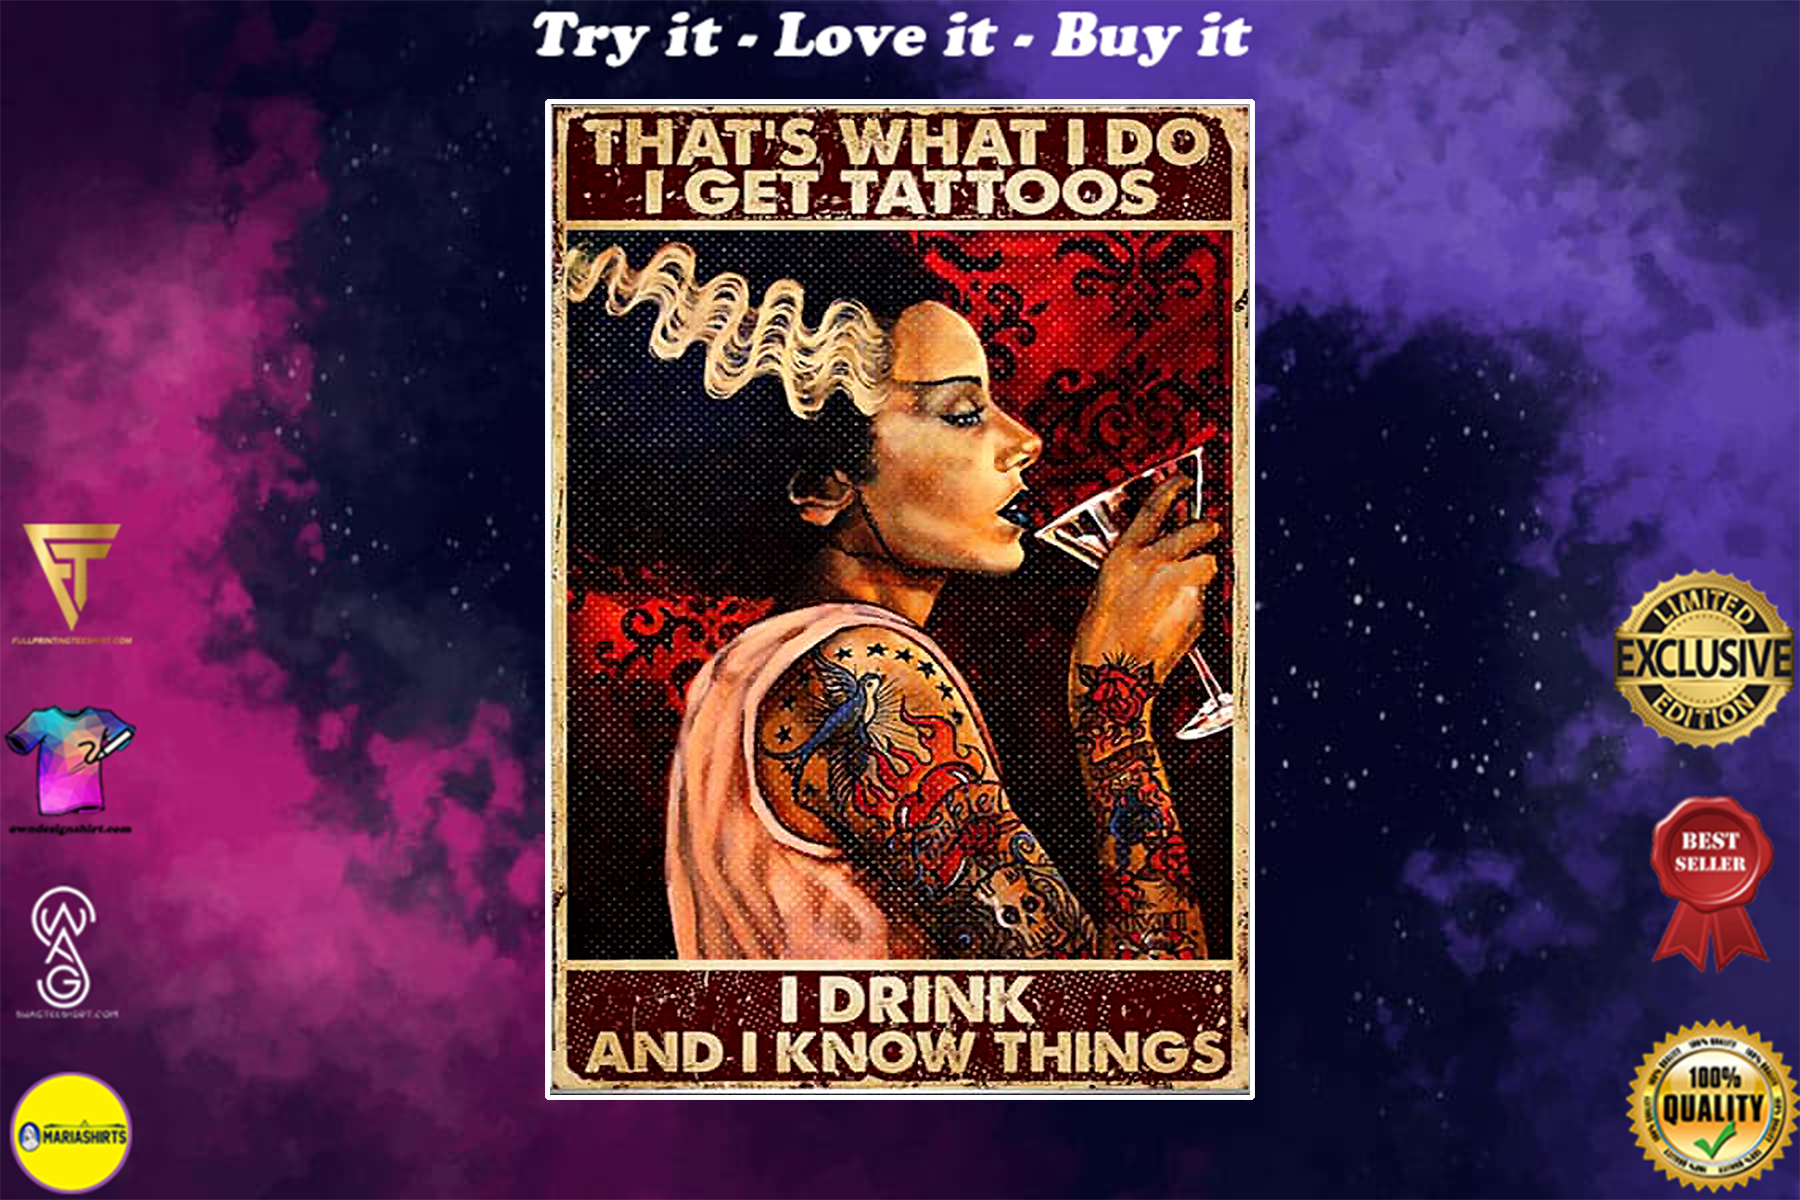 thats what i do i get tattoos i drink and i know things vintage poster